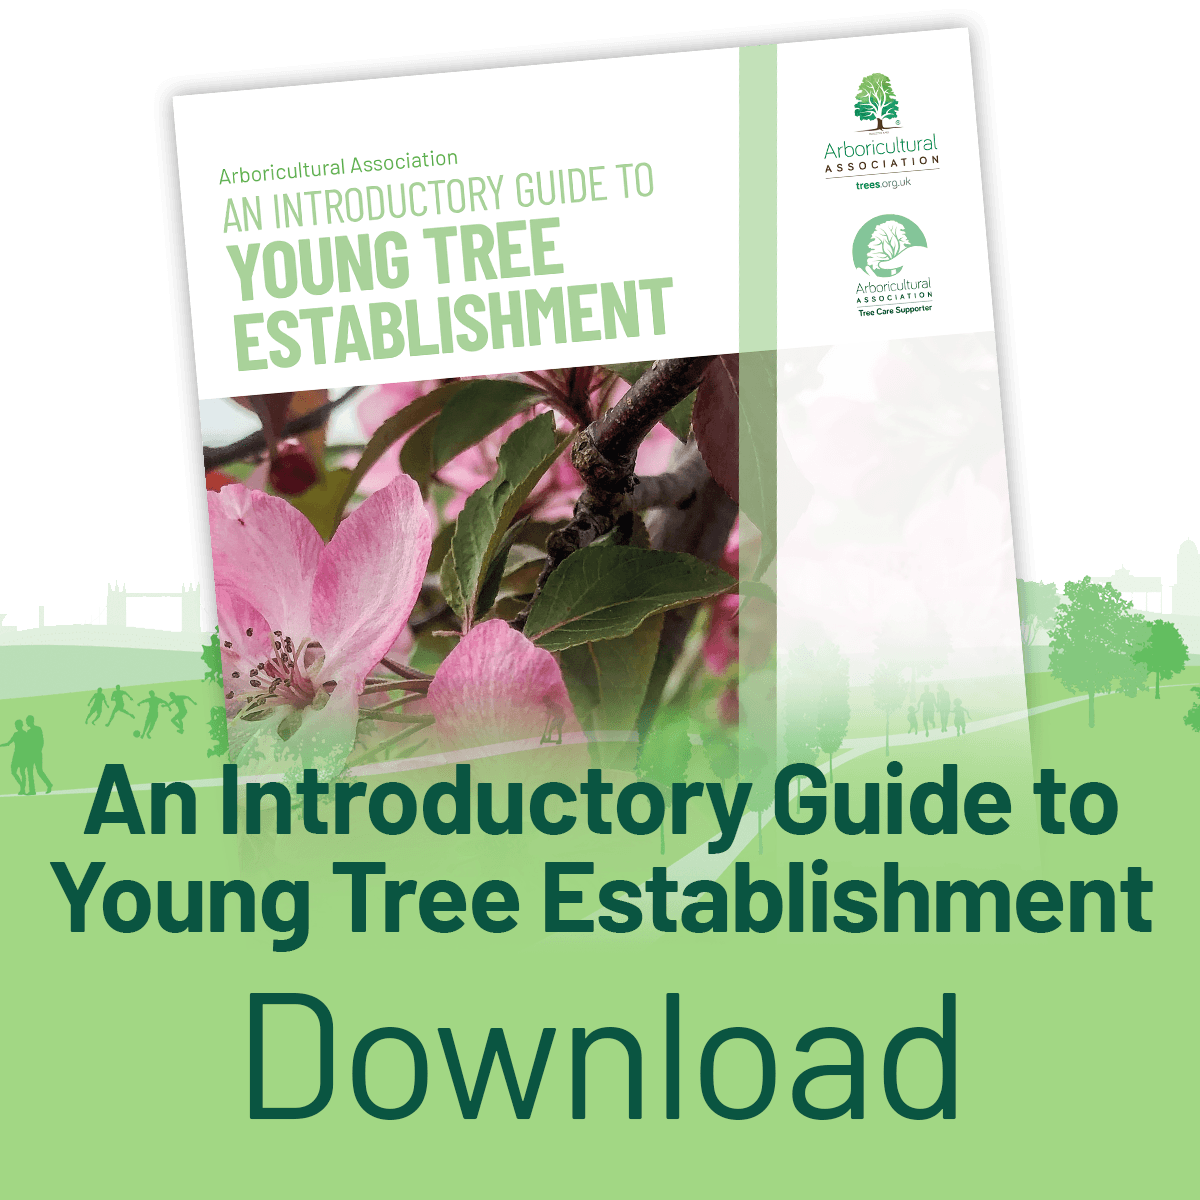 Download the Introductory Guide to Young Tree Establishment